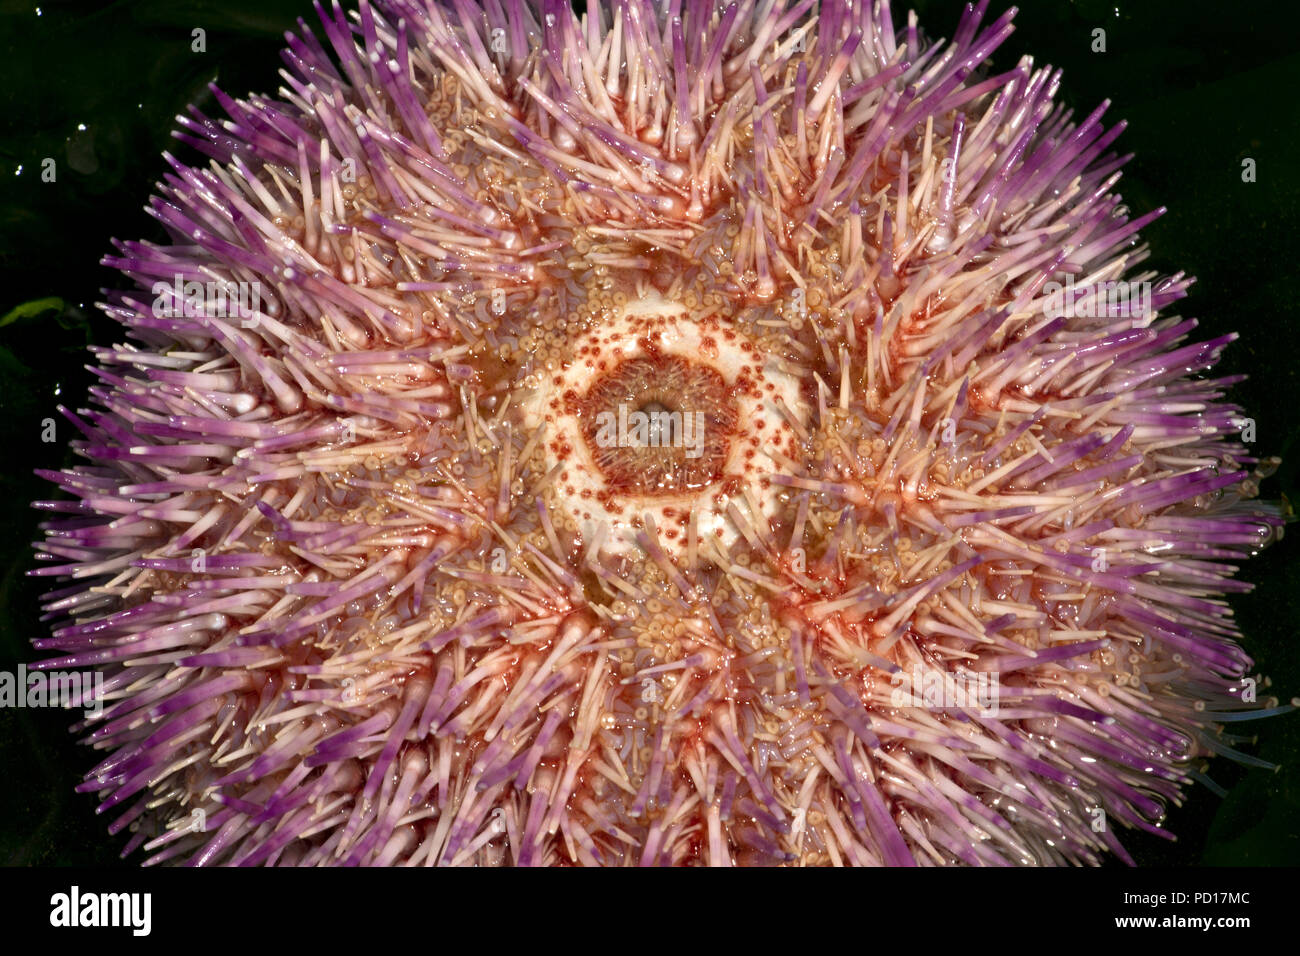 The mouthparts of an Edible Sea Urchin are on the underside. Stock Photo